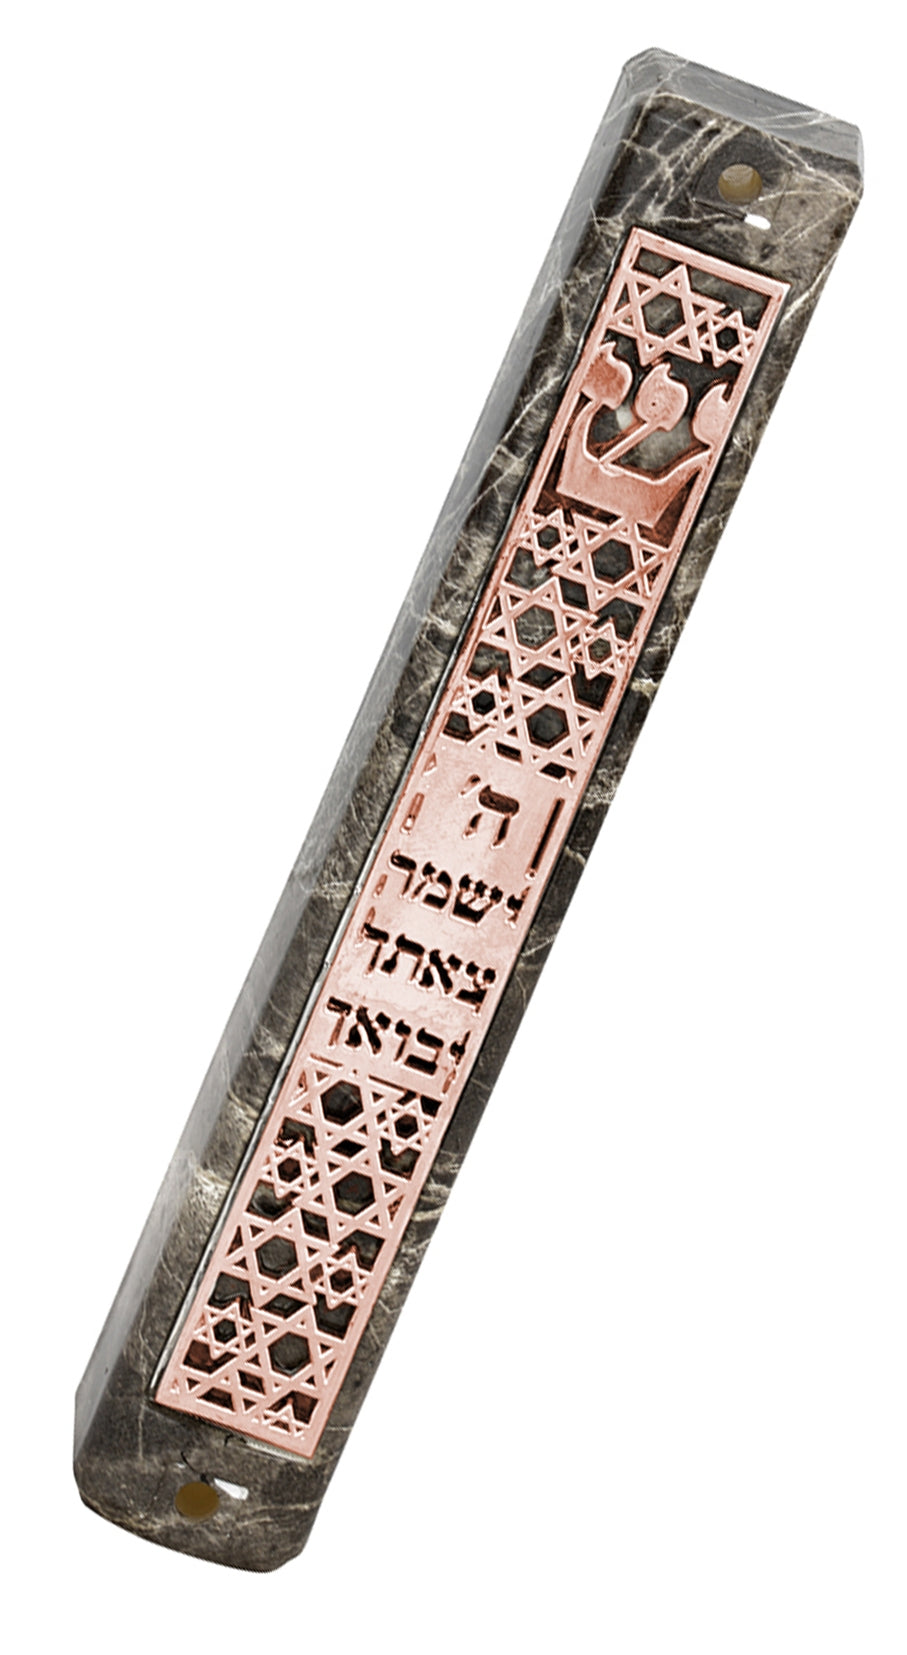 Marble Mezuzah Case with Star Design and Text on Plate